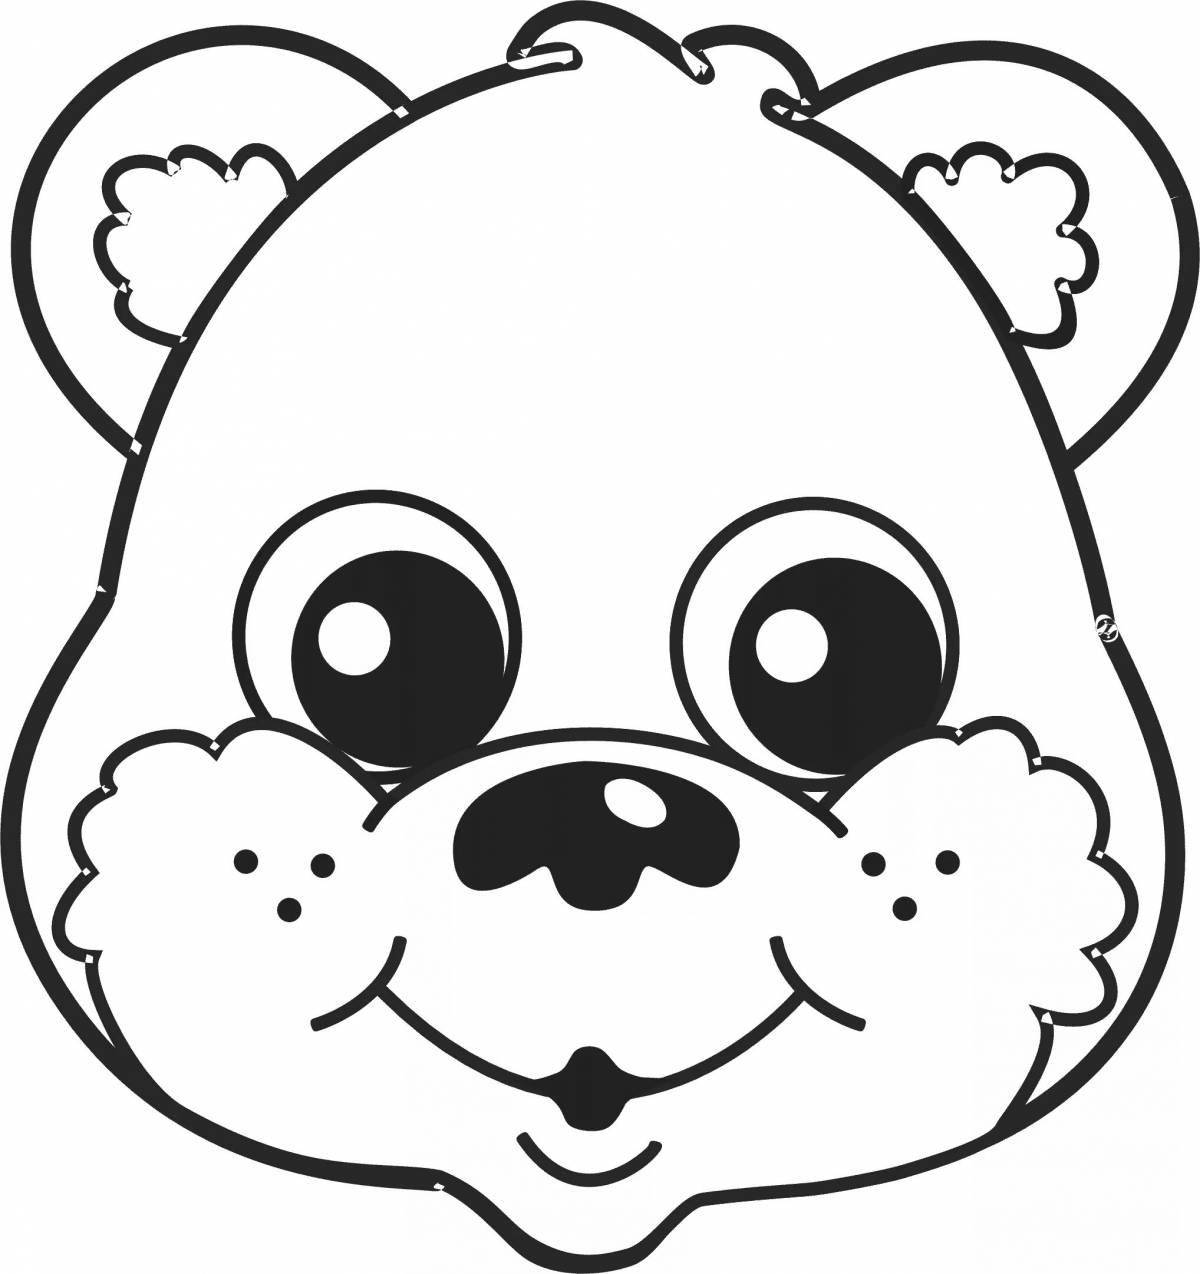 Fancy bear mask coloring page